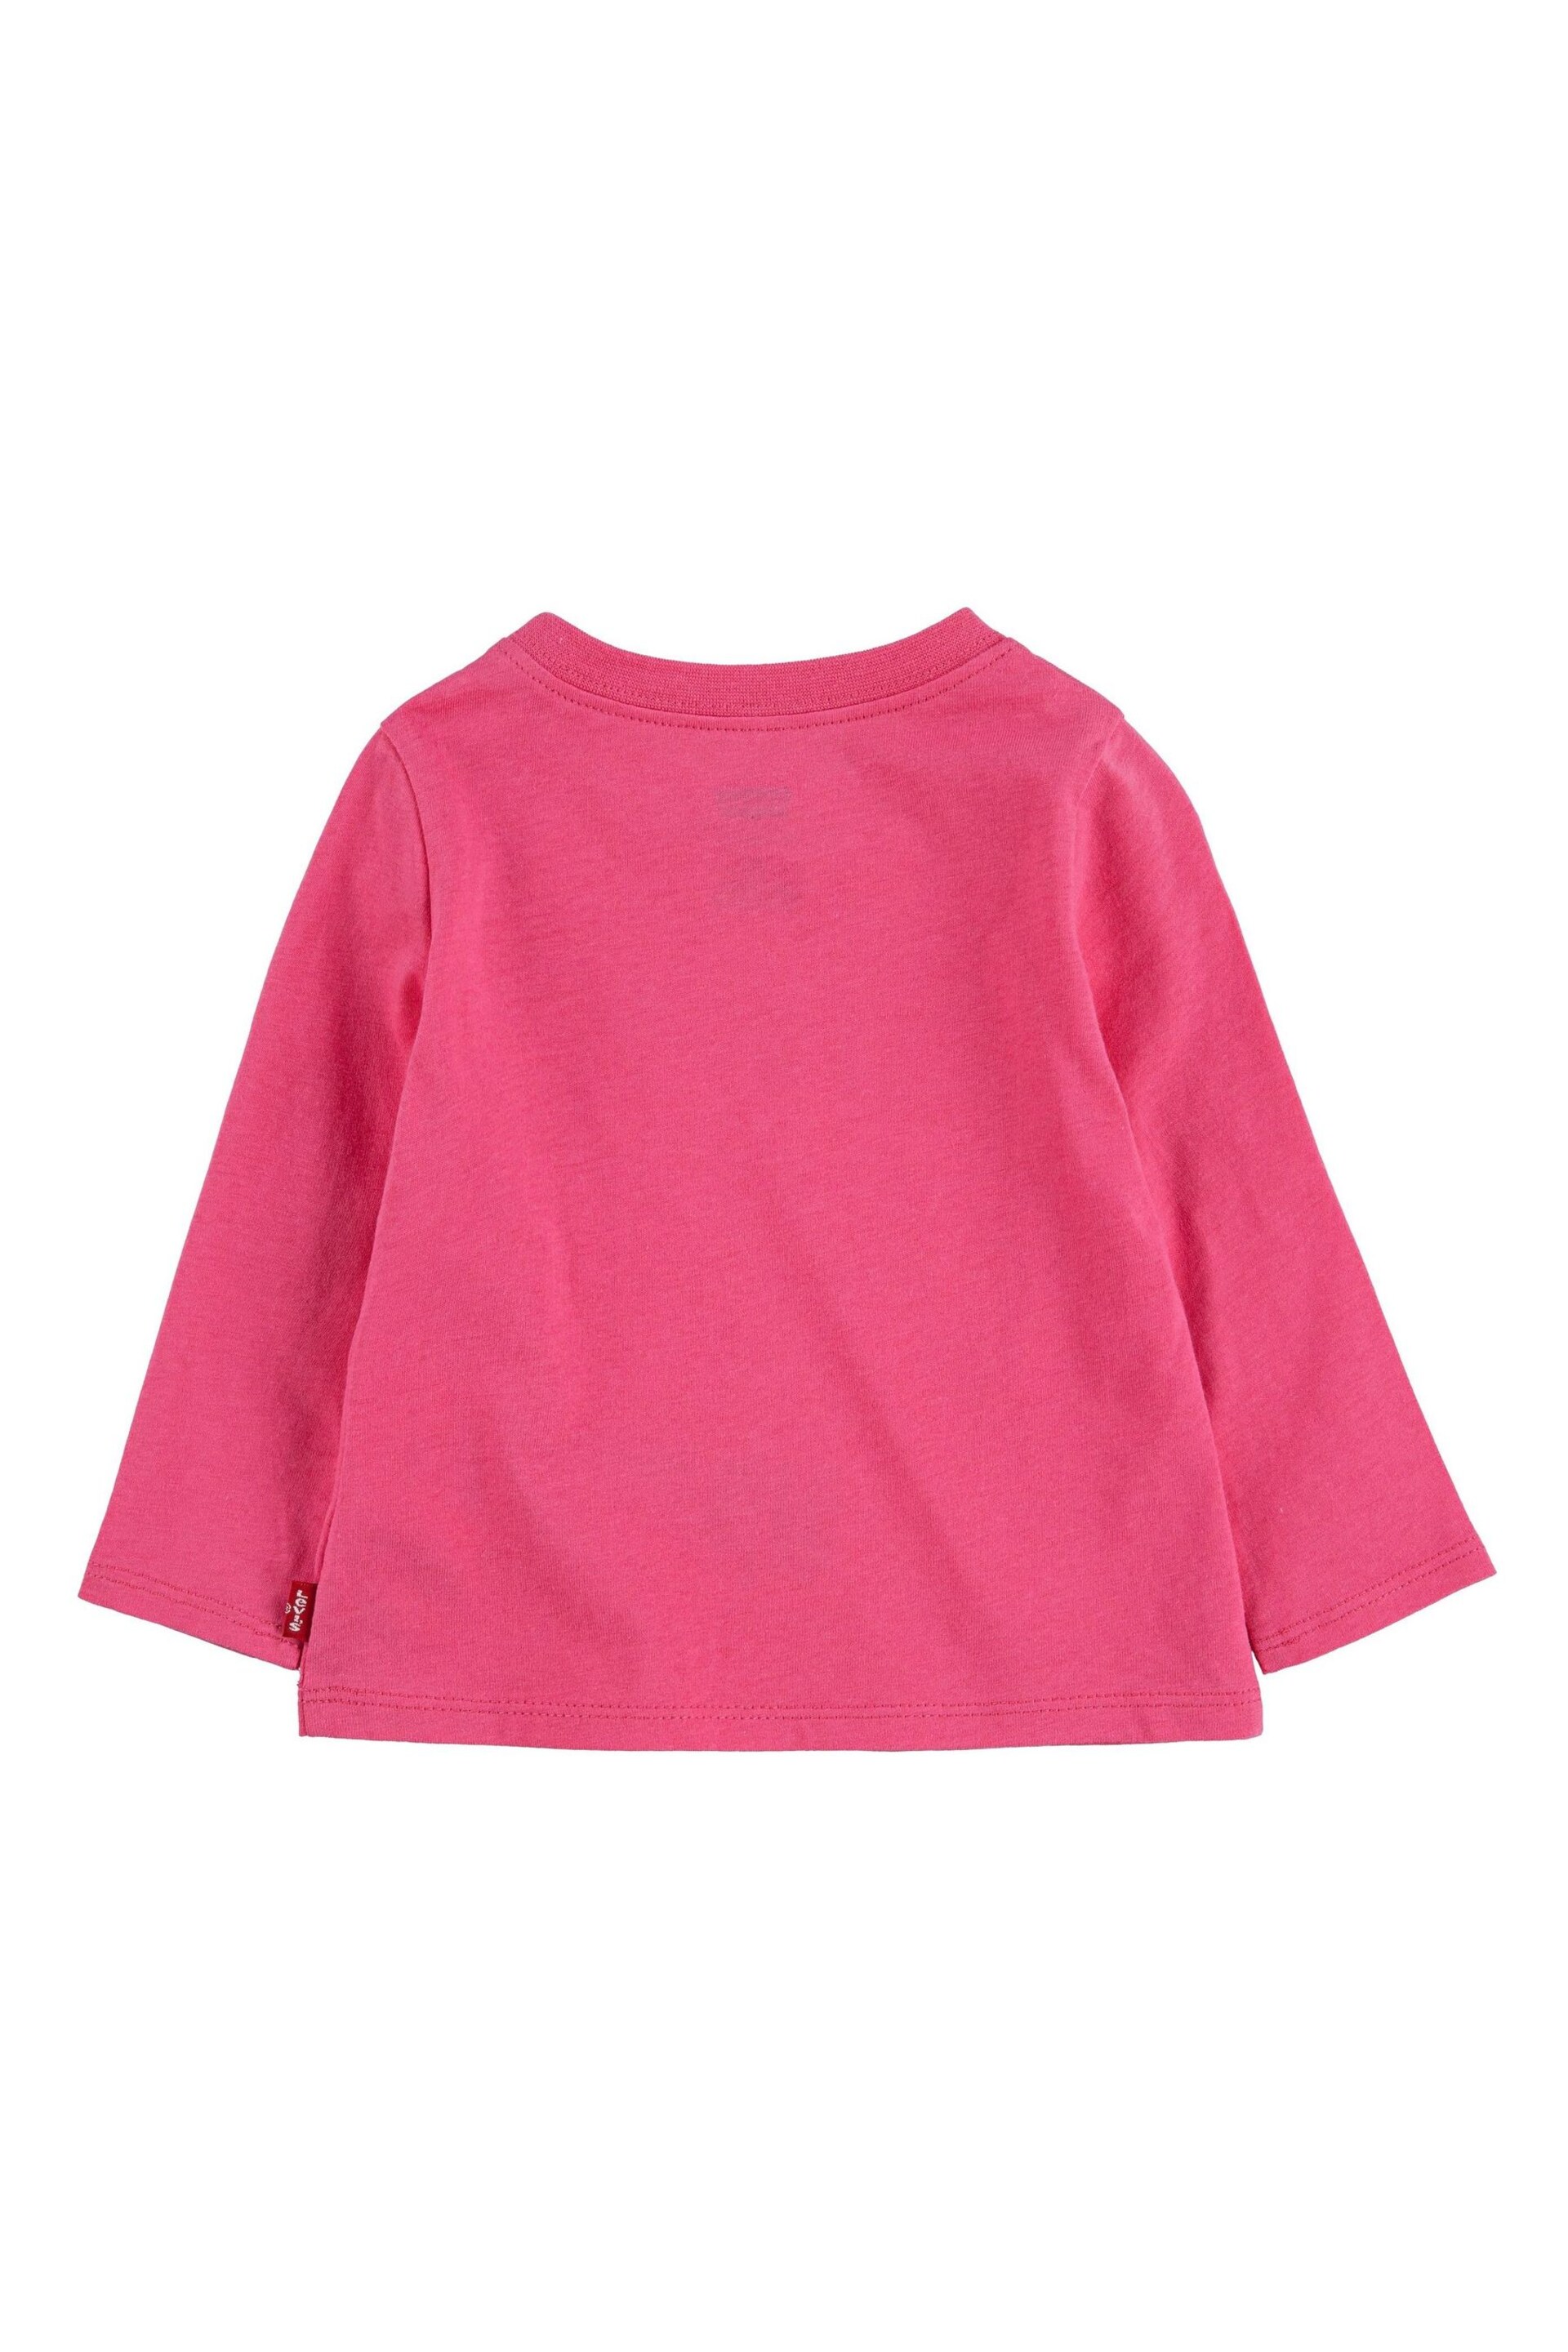 Levi's® Pink Long Sleeeve Batwing T-Shirt - Image 3 of 4